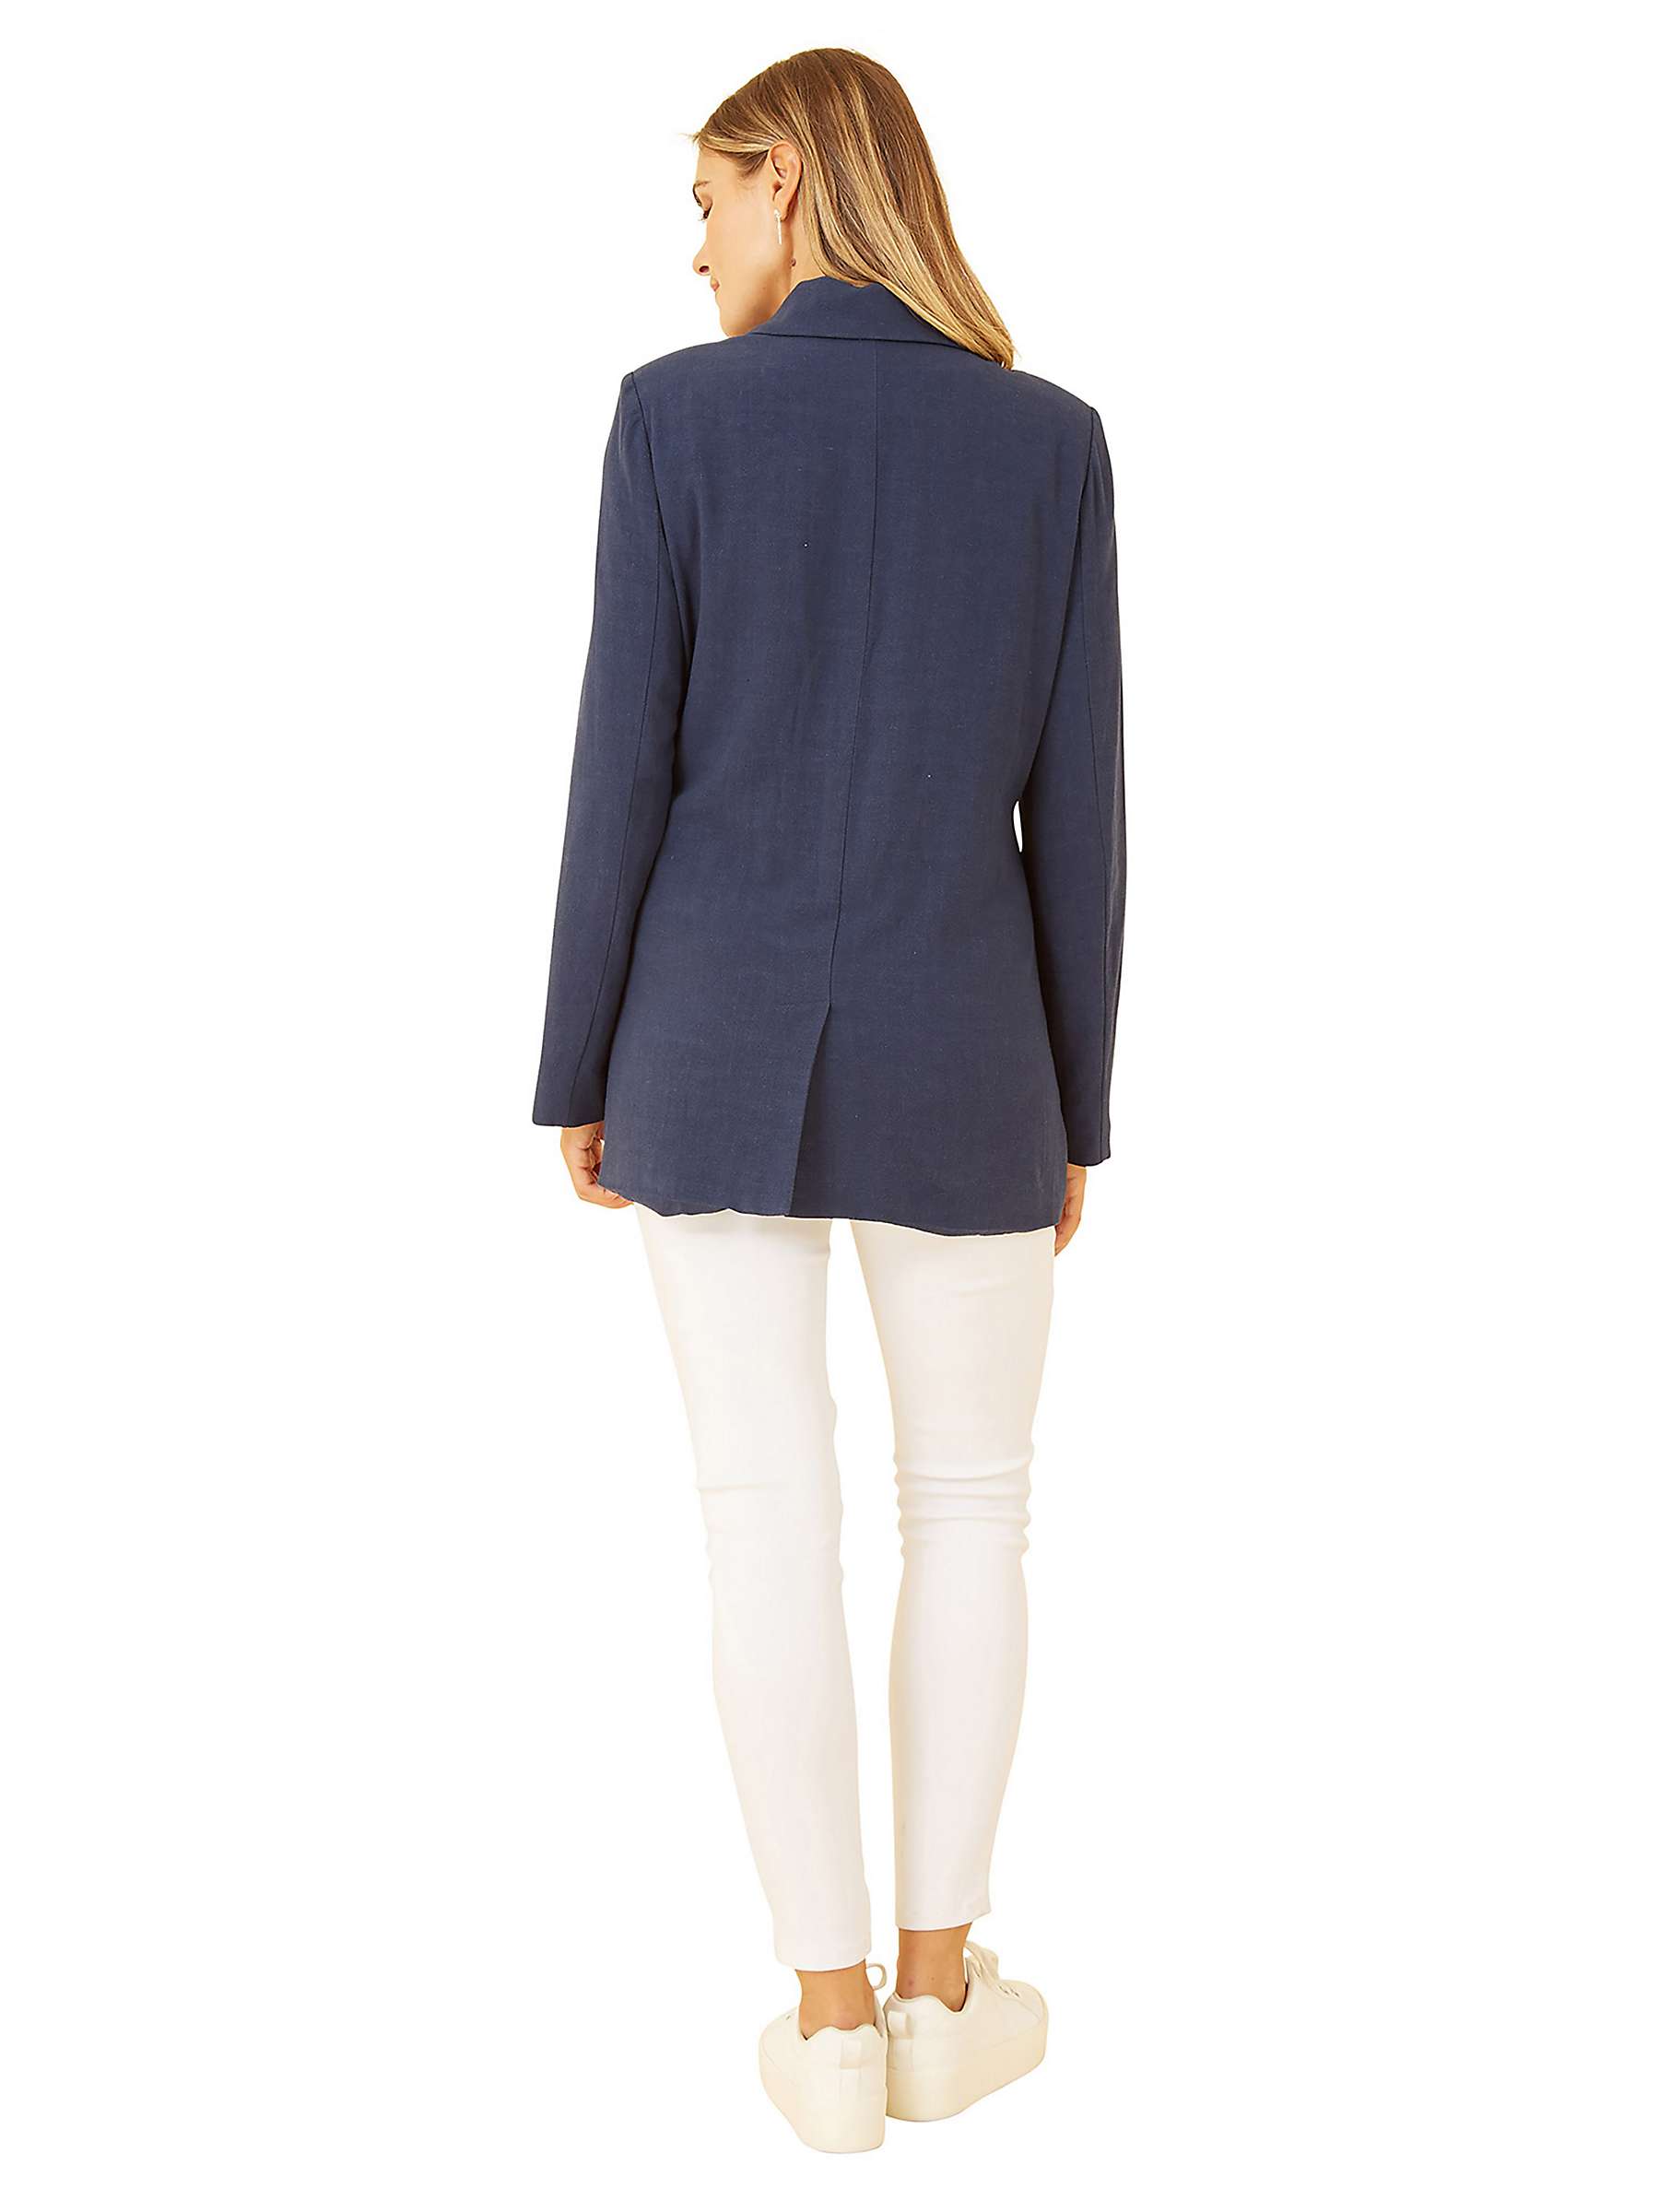 Buy Yumi Lightweight Relaxed Fit Blazer, Navy Online at johnlewis.com